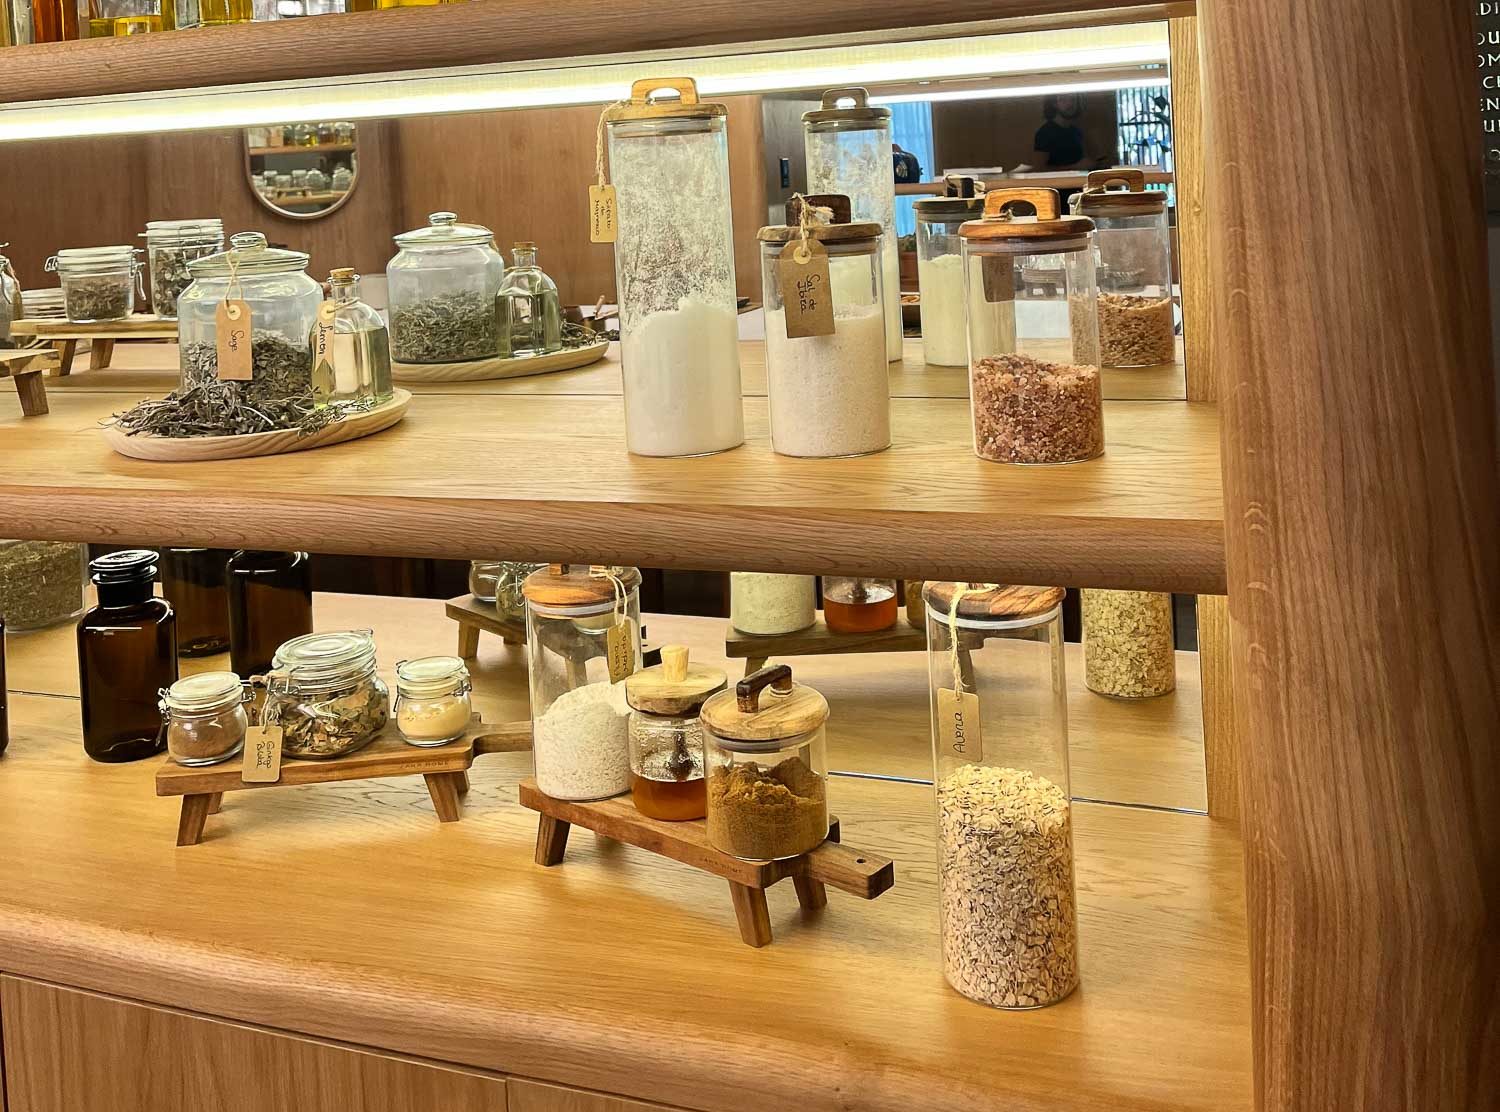 The Beach Caves at Six Senses Ibiza The apothecary where you can customize your own teas, tinctures and oils